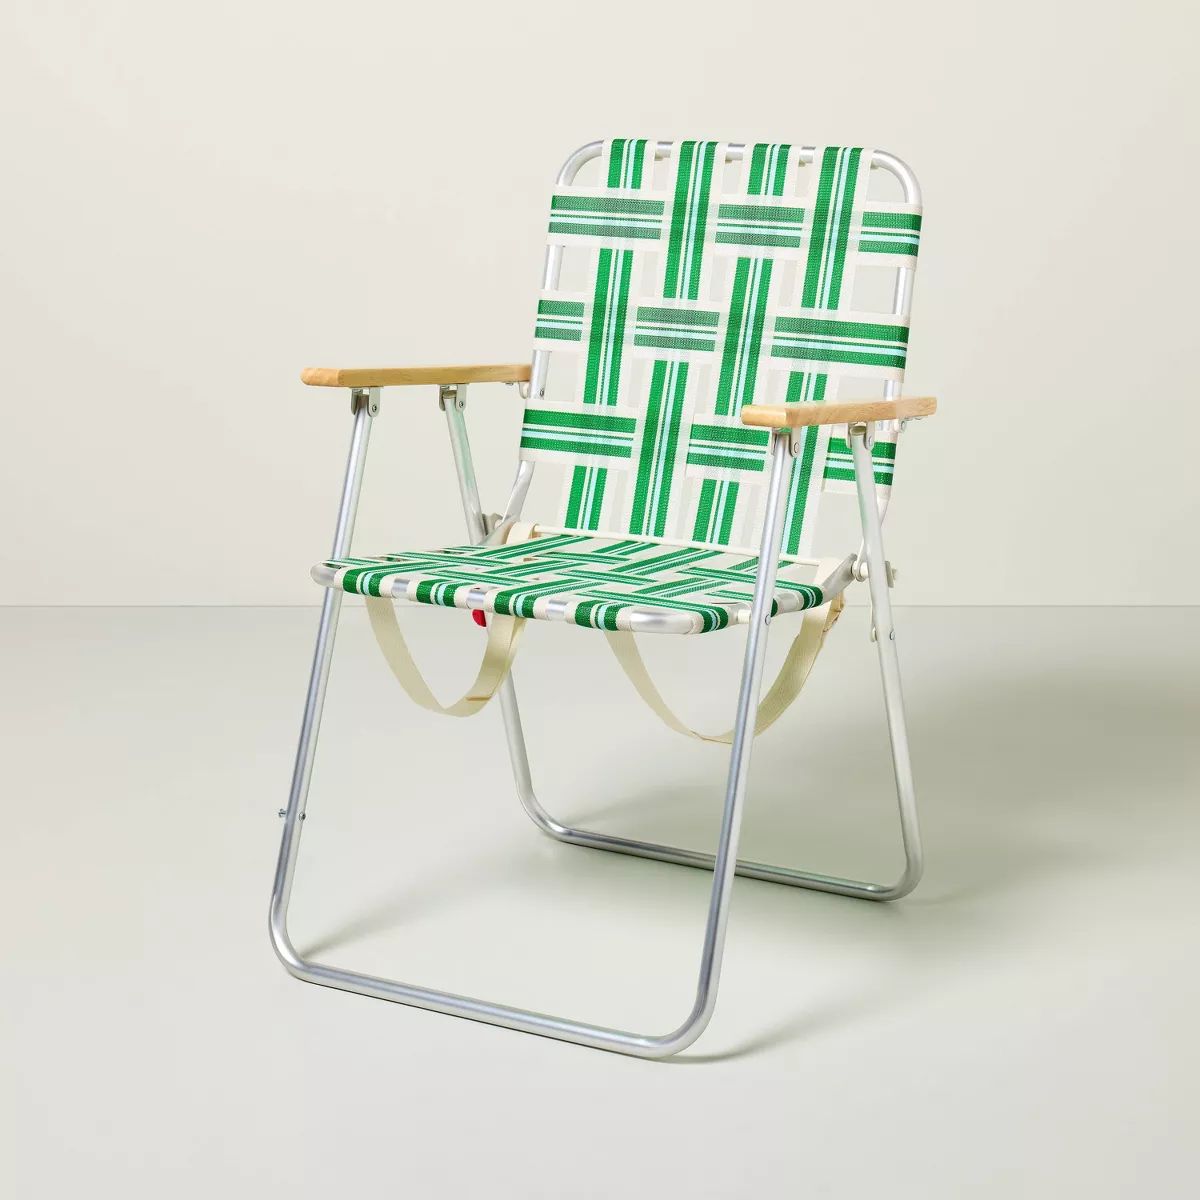 Folding Lawn Chair - Light Blue/Cream/Green - Hearth & Hand™ with Magnolia | Target